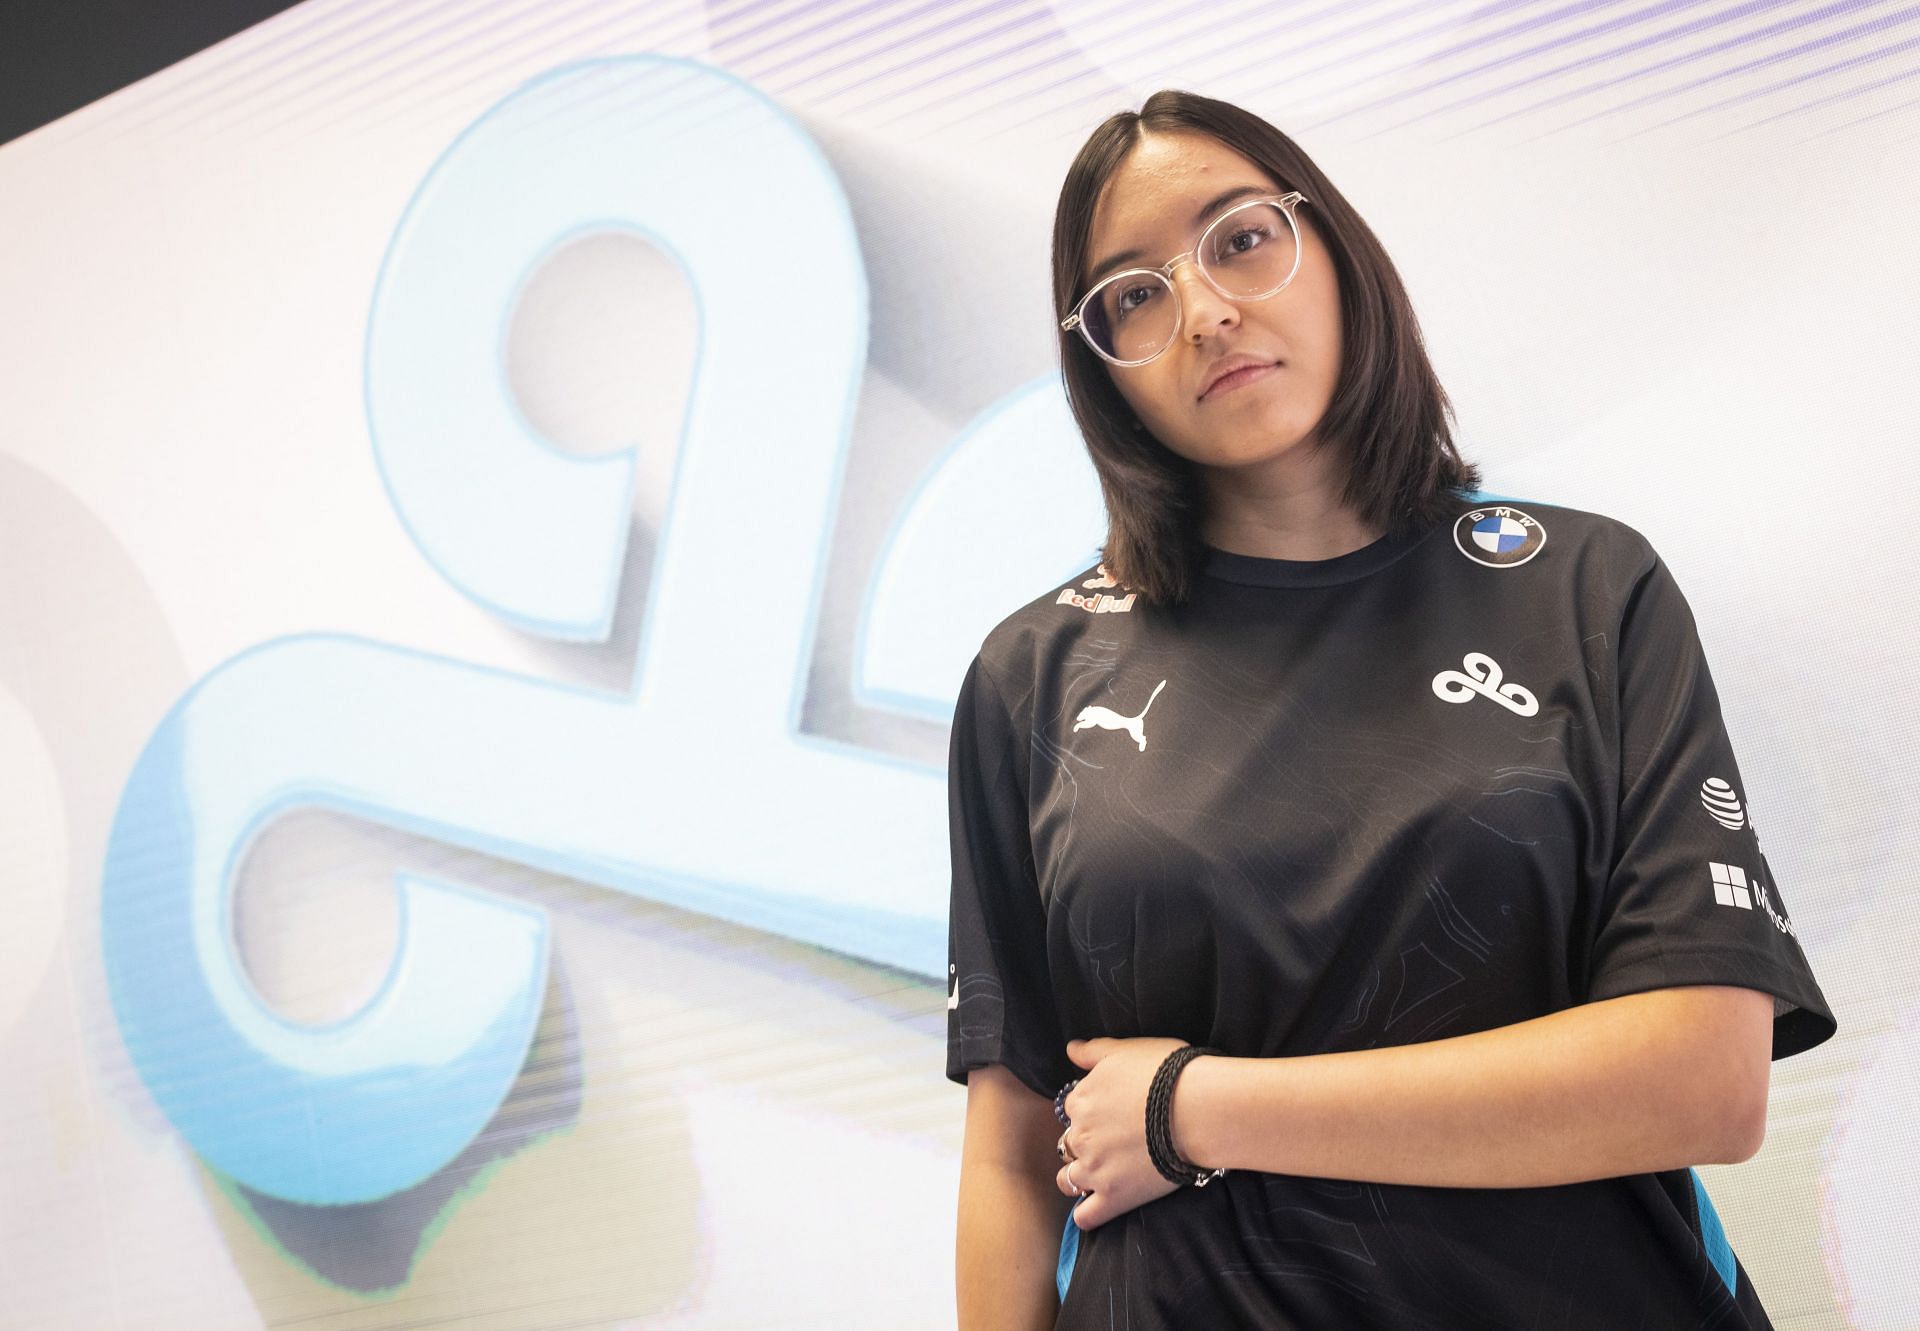 meL from Cloud9 White speaks about opposition